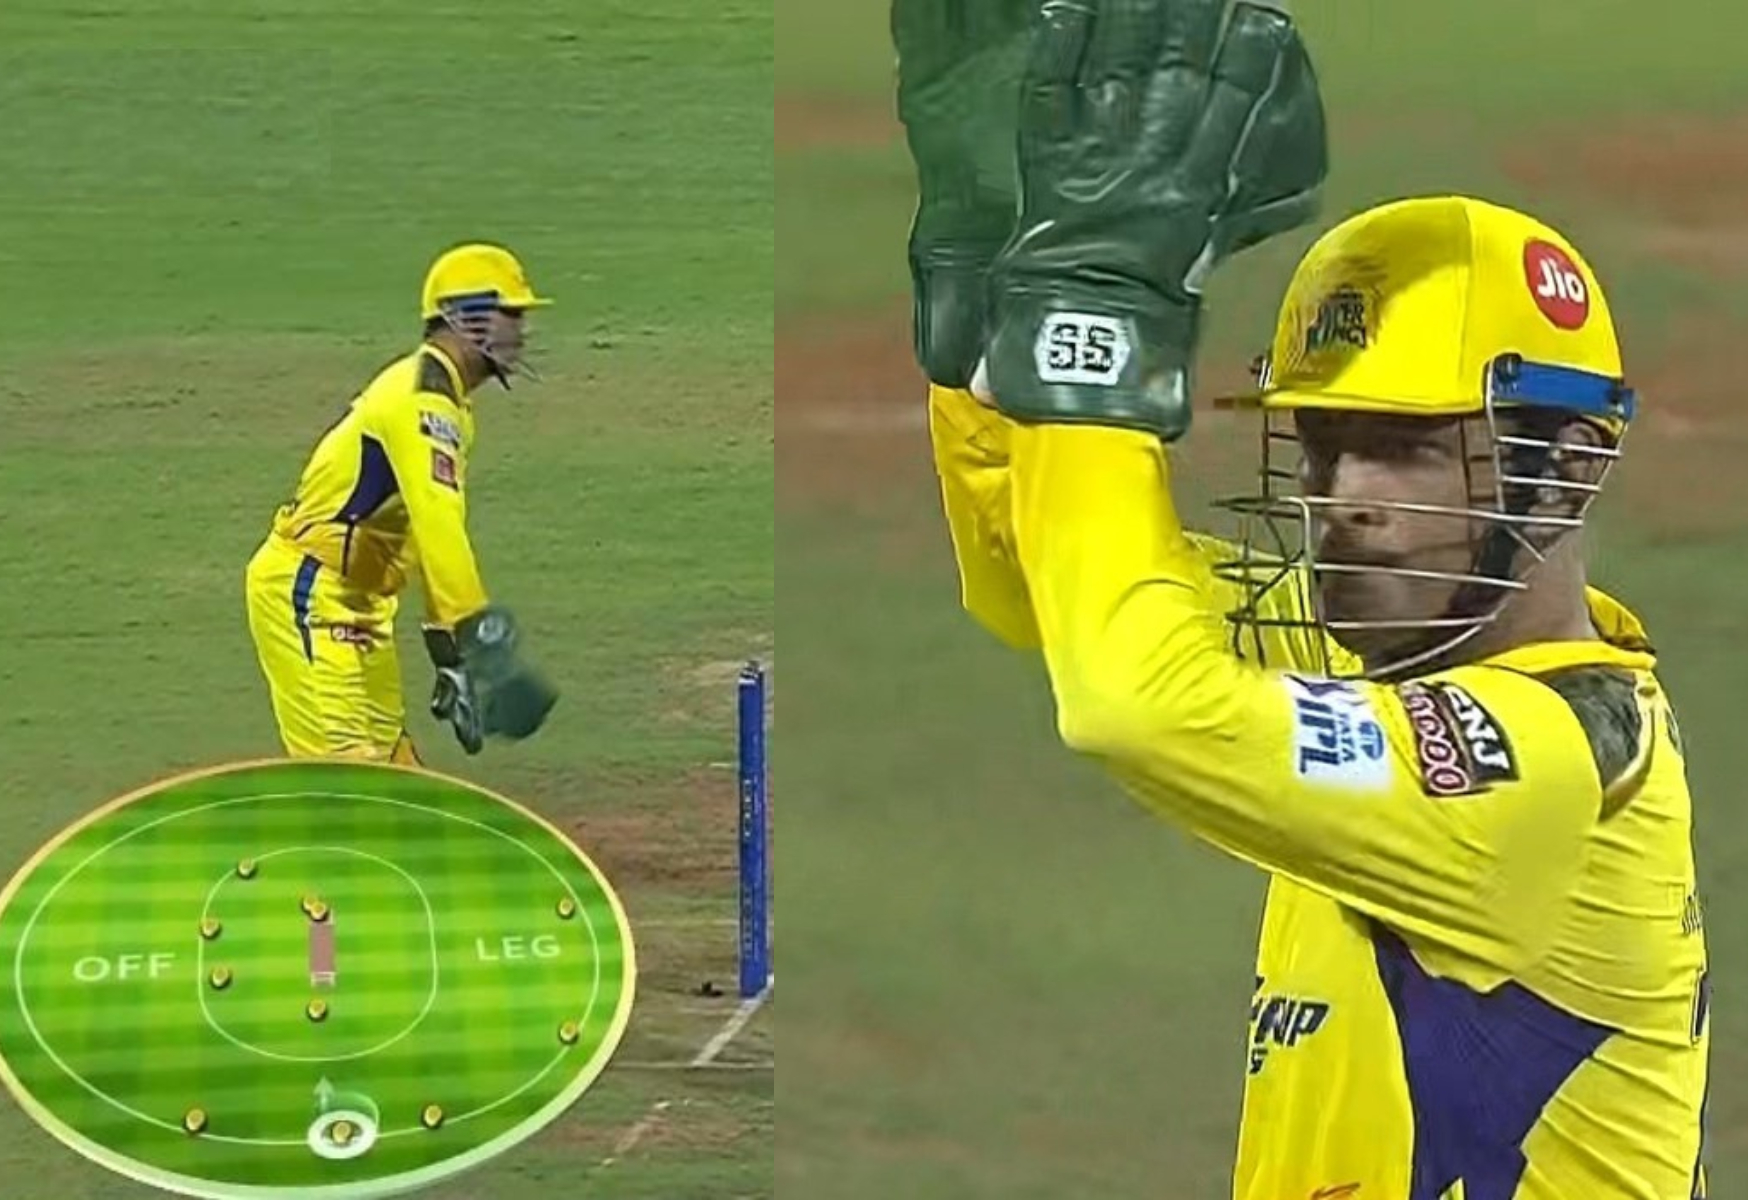 MS Dhoni's field setting for Pollard and then appreciates Dube for the catch | Twitter